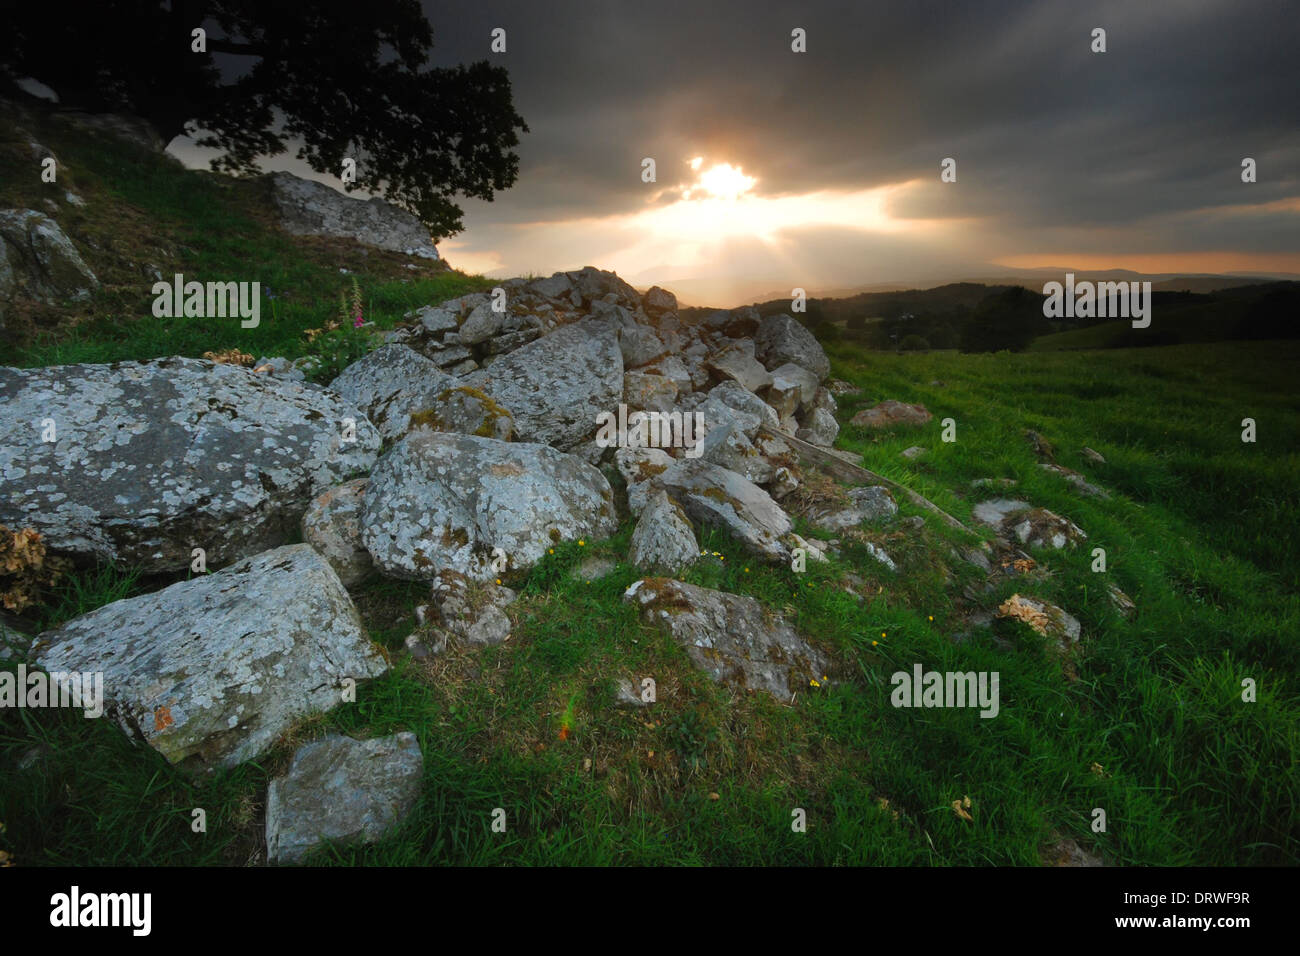 Sun bursting through the clouds, over the North Wales landscape, with rocks in the foreground Stock Photo